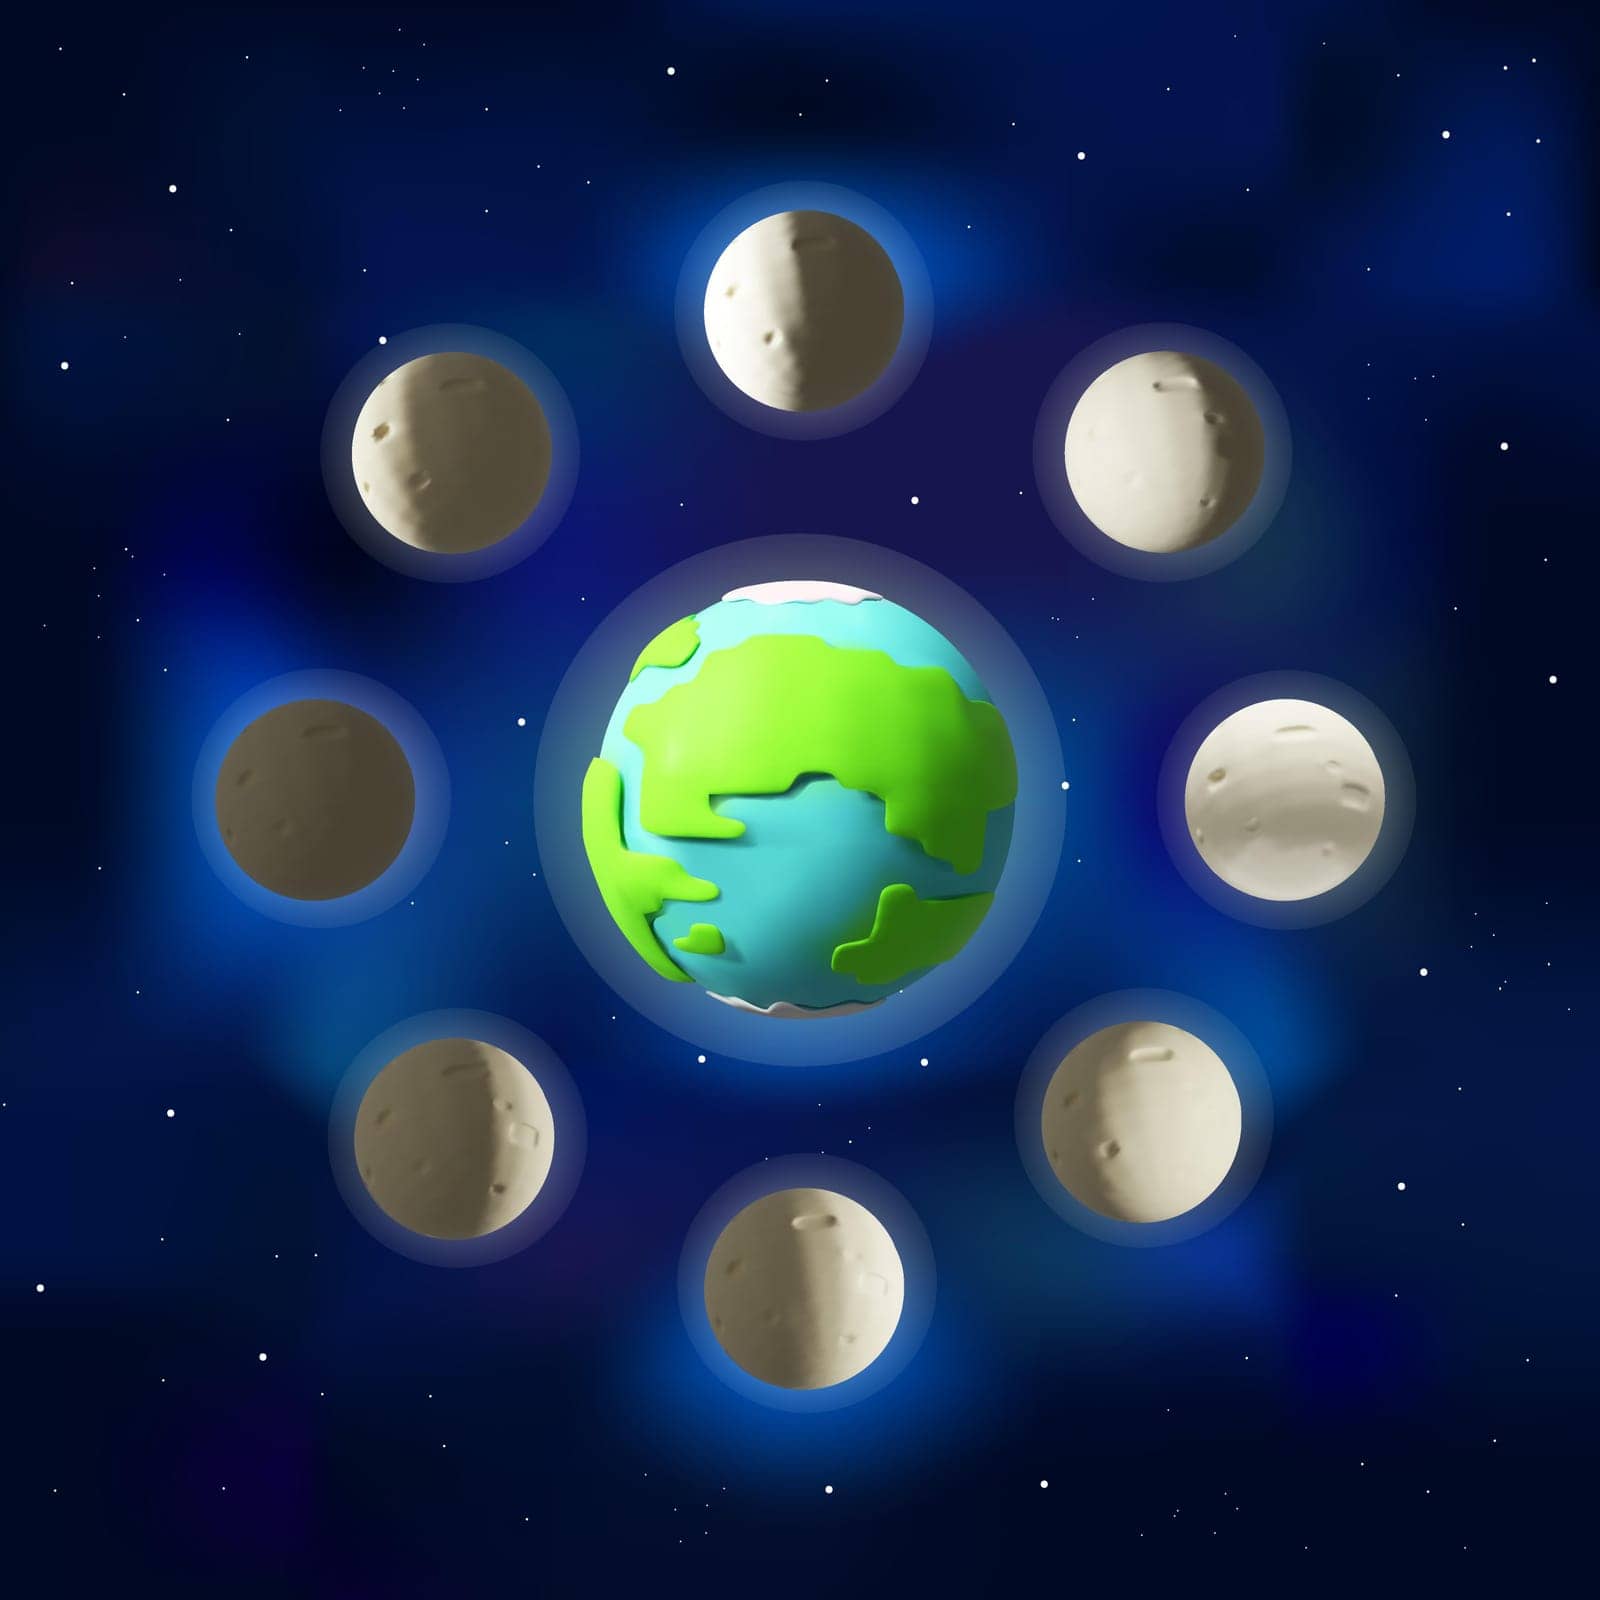 3D render lunar phases. Shape of Moon depends on the Moon's position in orbit around the Earth and sun. Realistic vector illustration in clay style. Full moon, crescent, new moon, space cycle